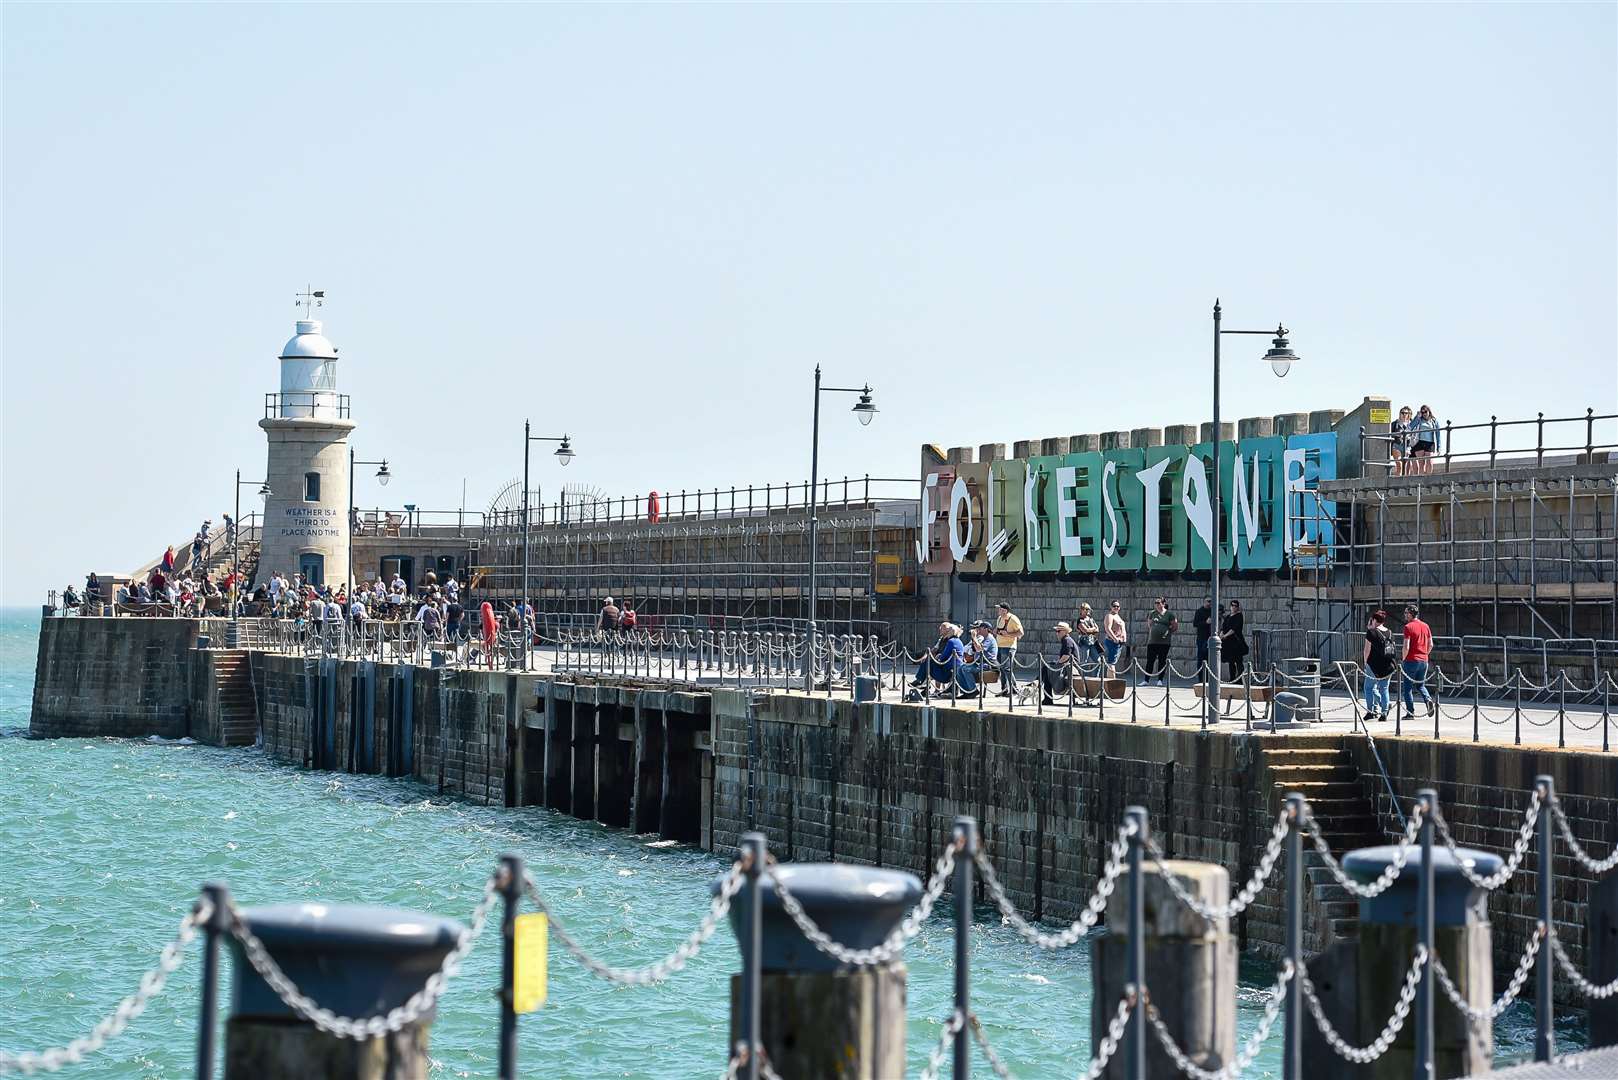 Folkestone Harbour Arm is home to food and drink vendors, a bar, golf and cinema